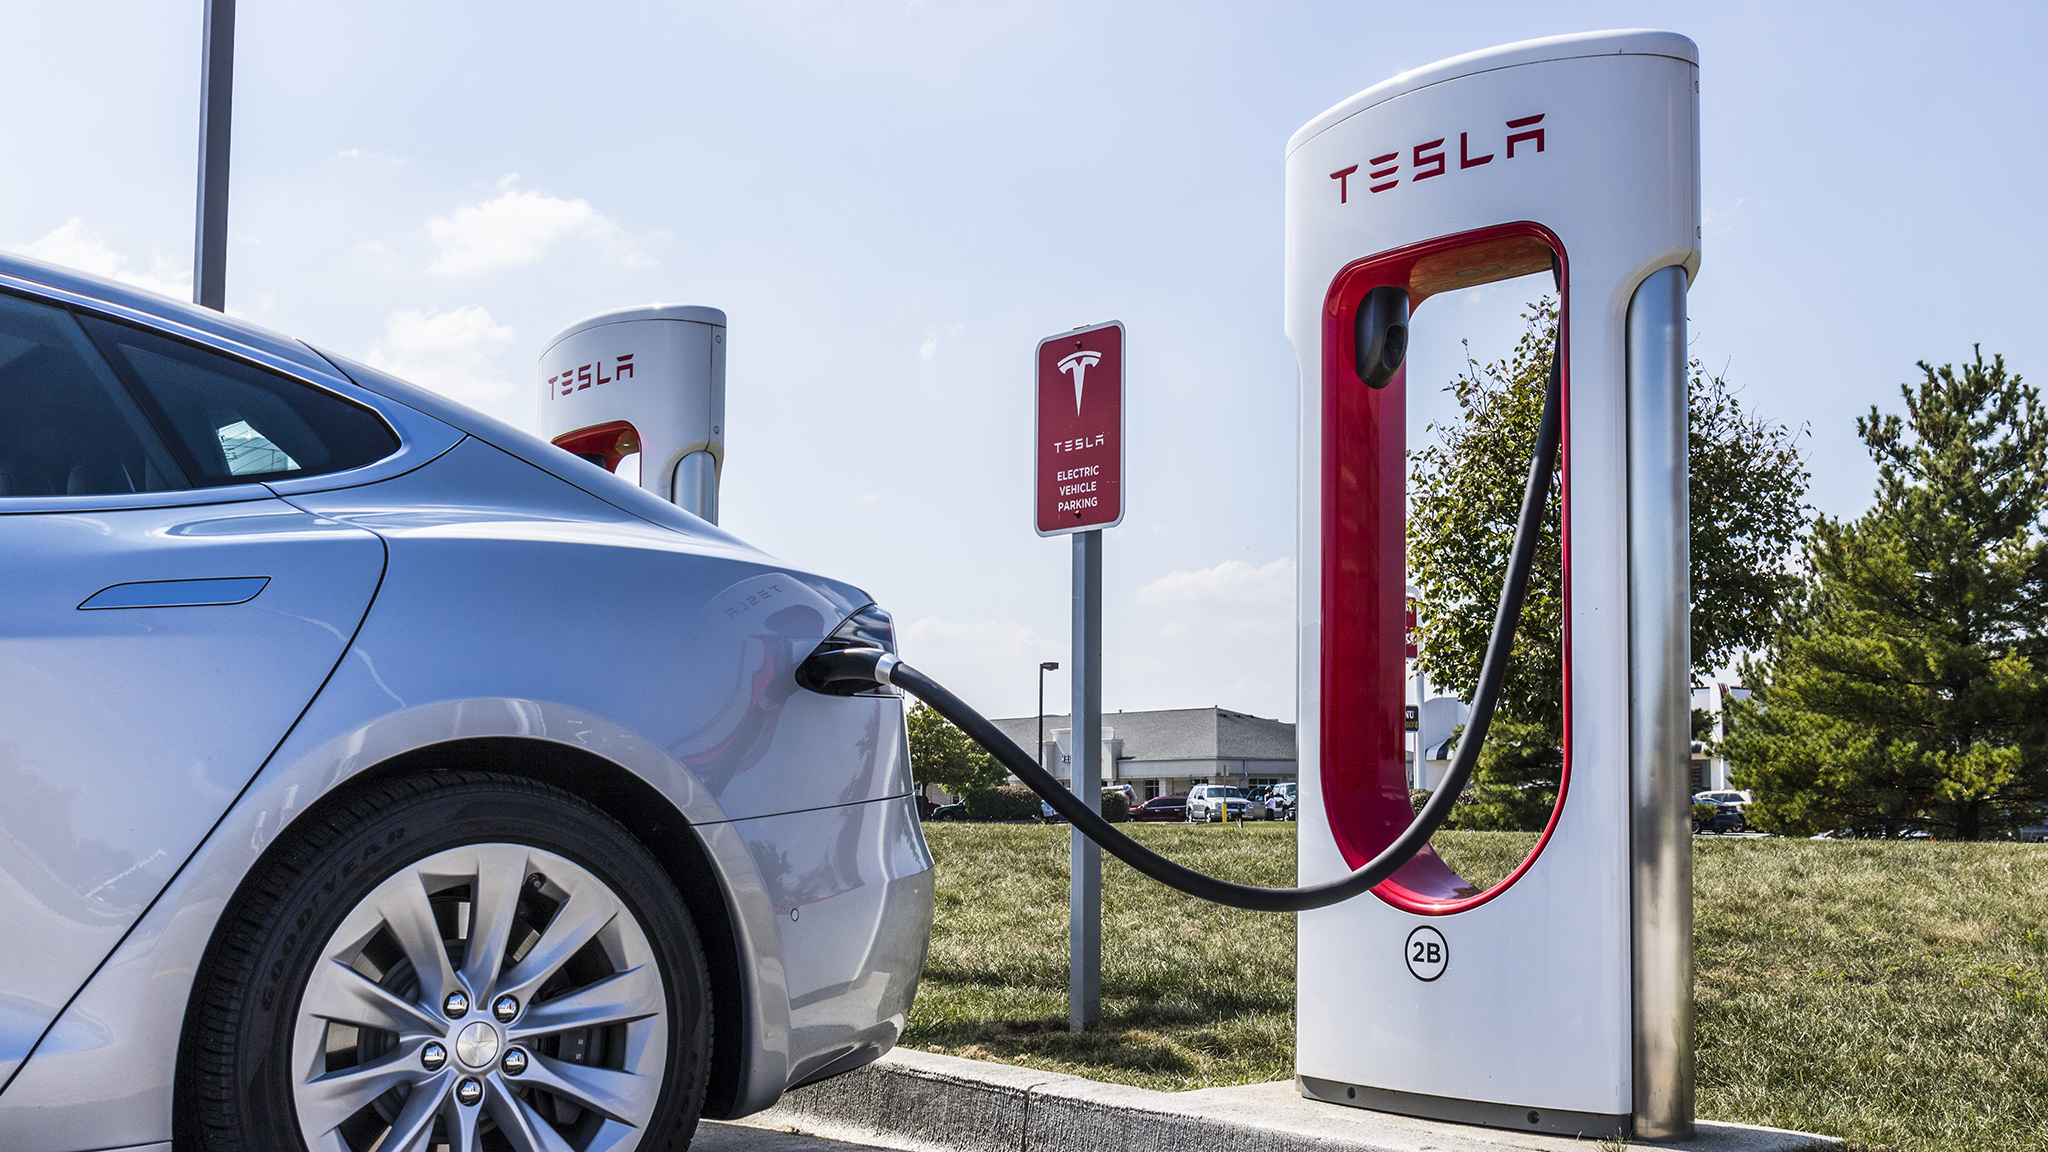 Tesla reduces Supercharger prices as charging business matures